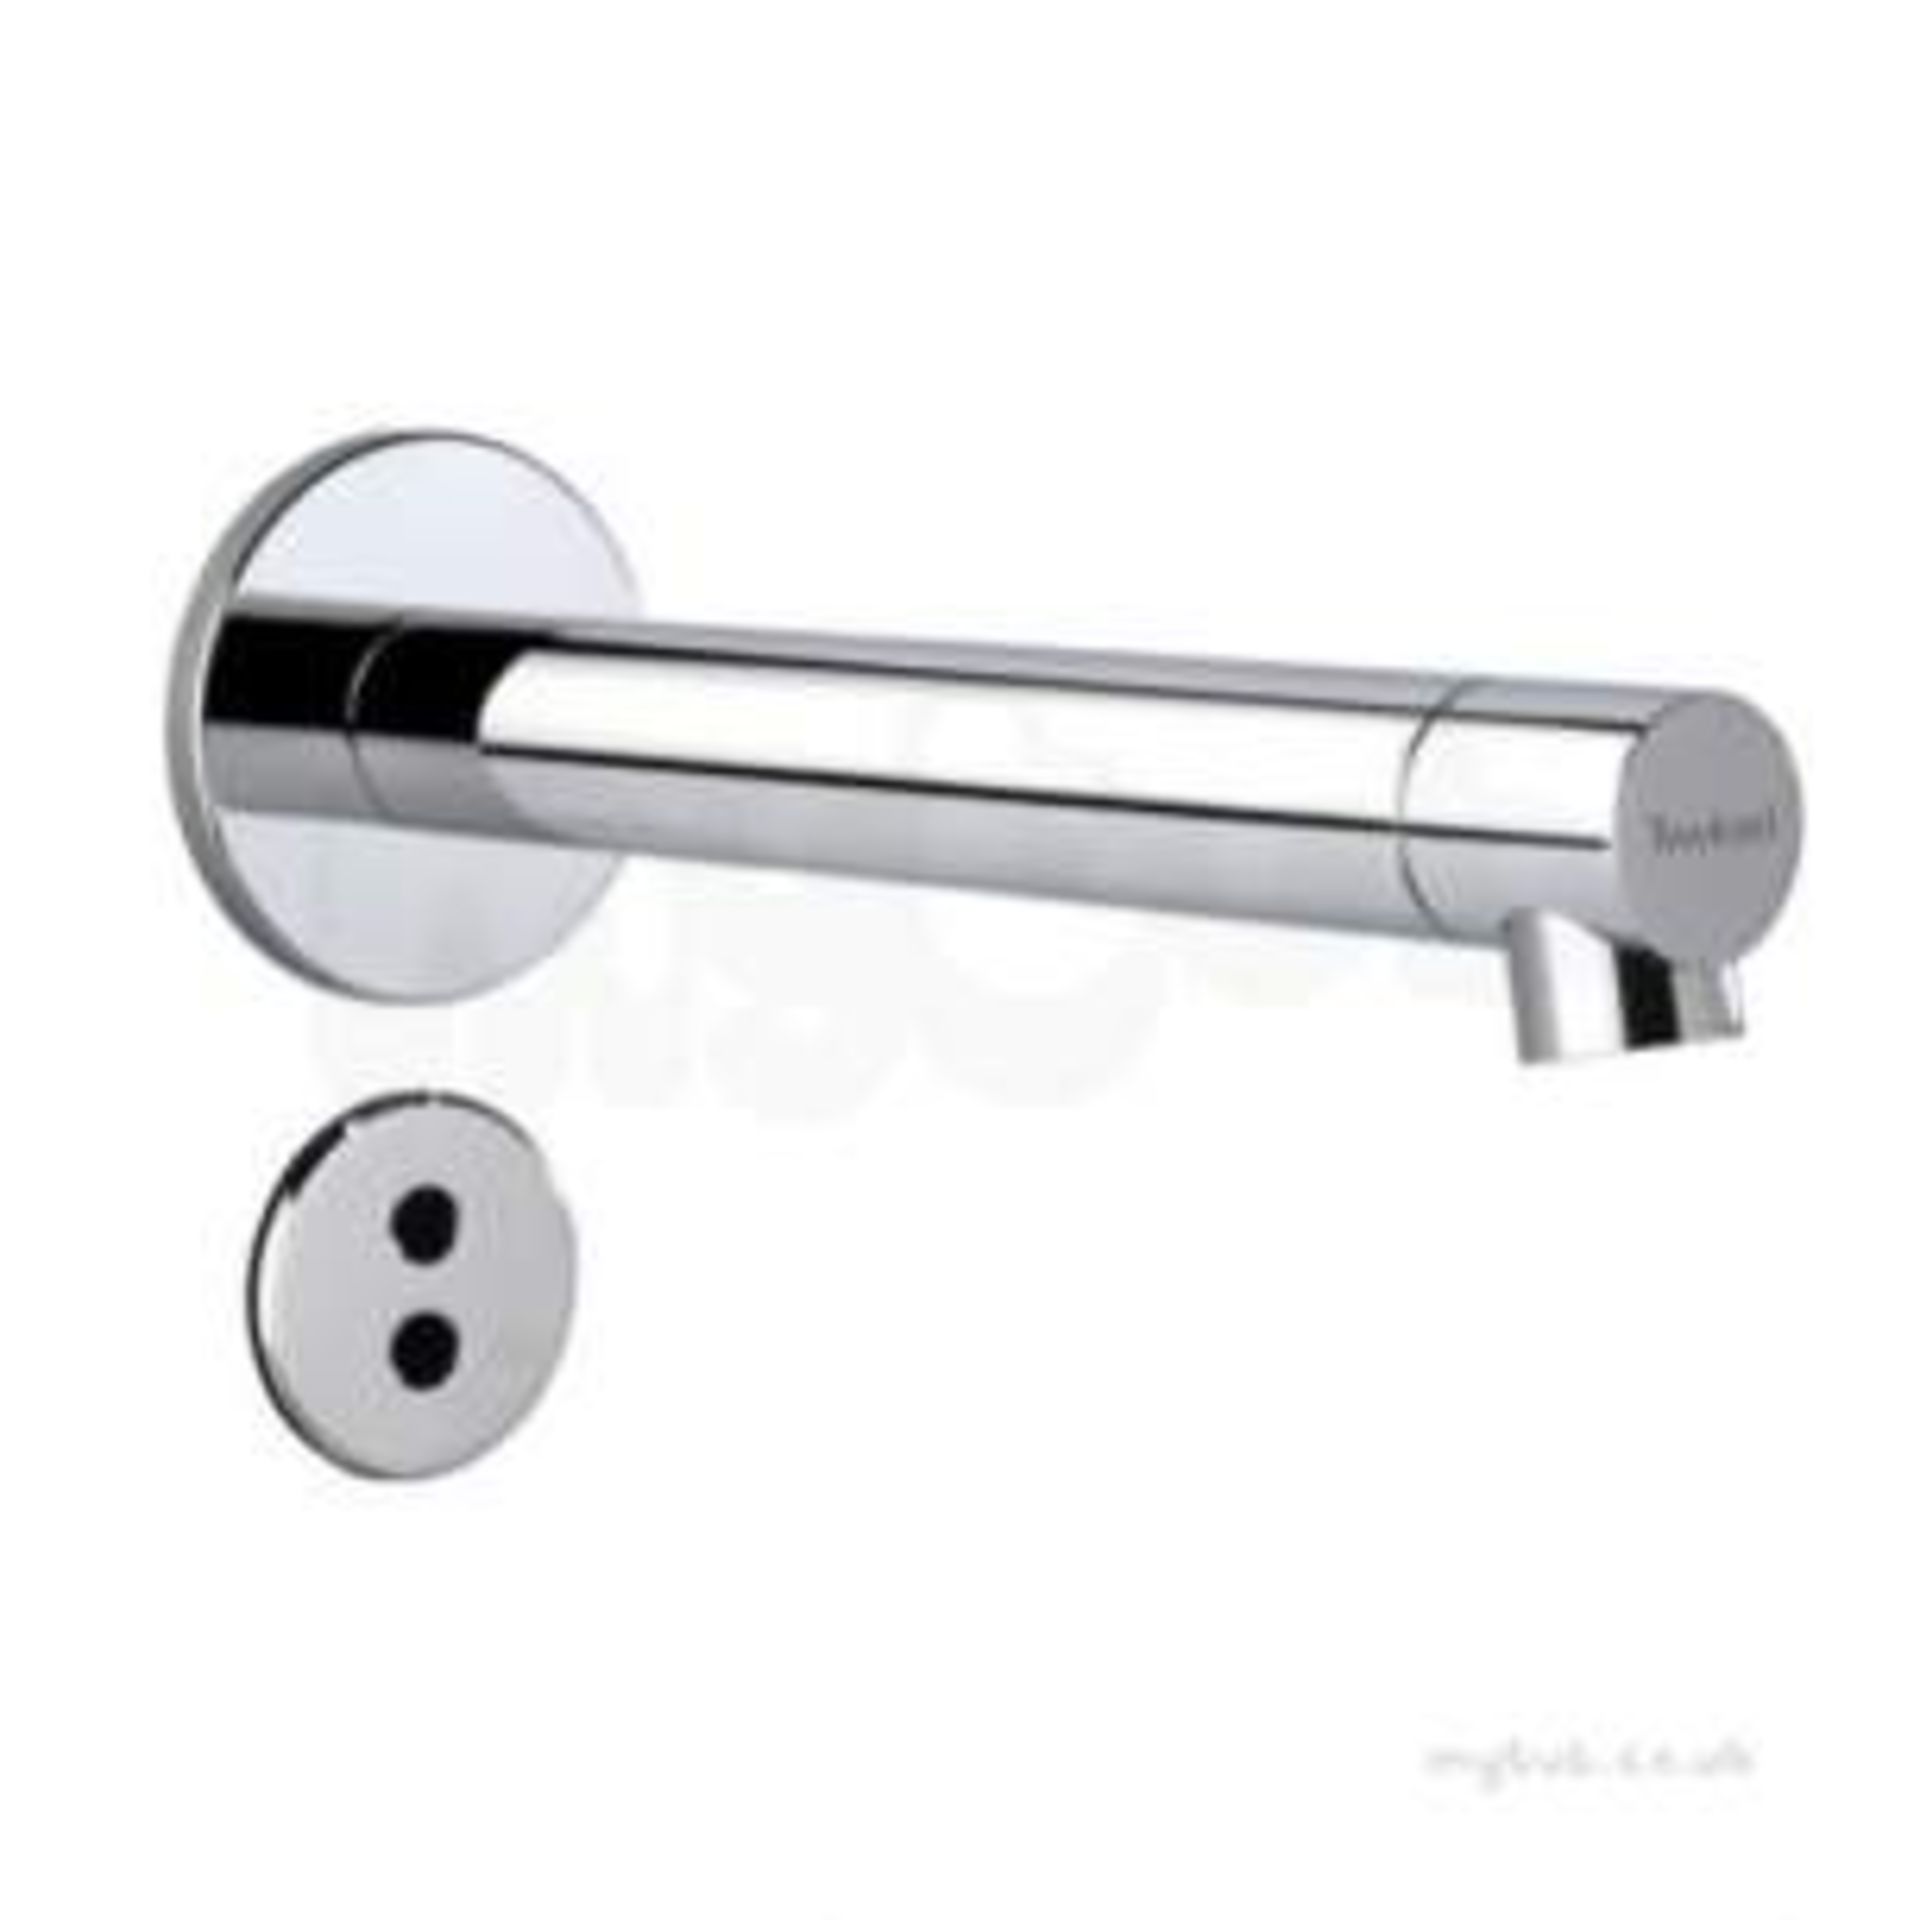 (CE134) Twyford IR Wall Mounted Spout Tap 234mm Wall Mounted Infra Red Spout 234mm, Min. Opera...